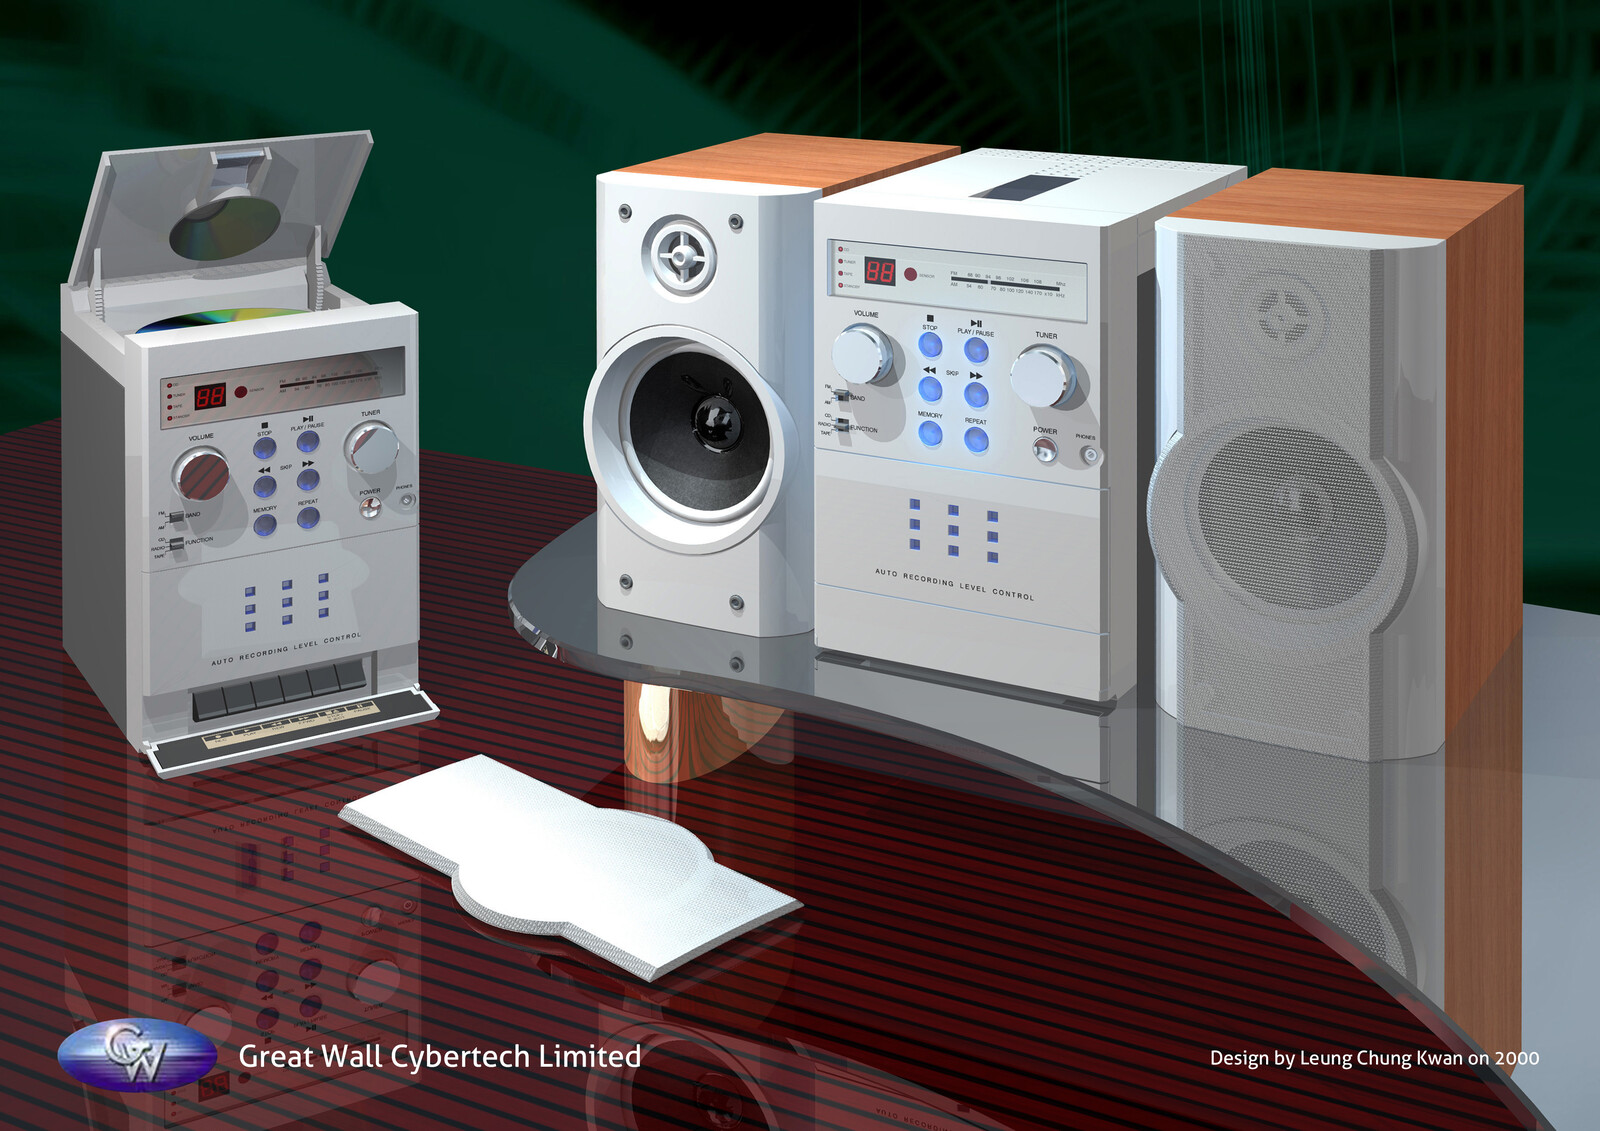 💎 Mini Hi-Fi System |  Design by Leung Chung Kwan on 2000 💎
Brand Name︰ROWA | Client︰Great Wall Cybertech Limited
More︰http://bit.ly/gw-m101-hf66